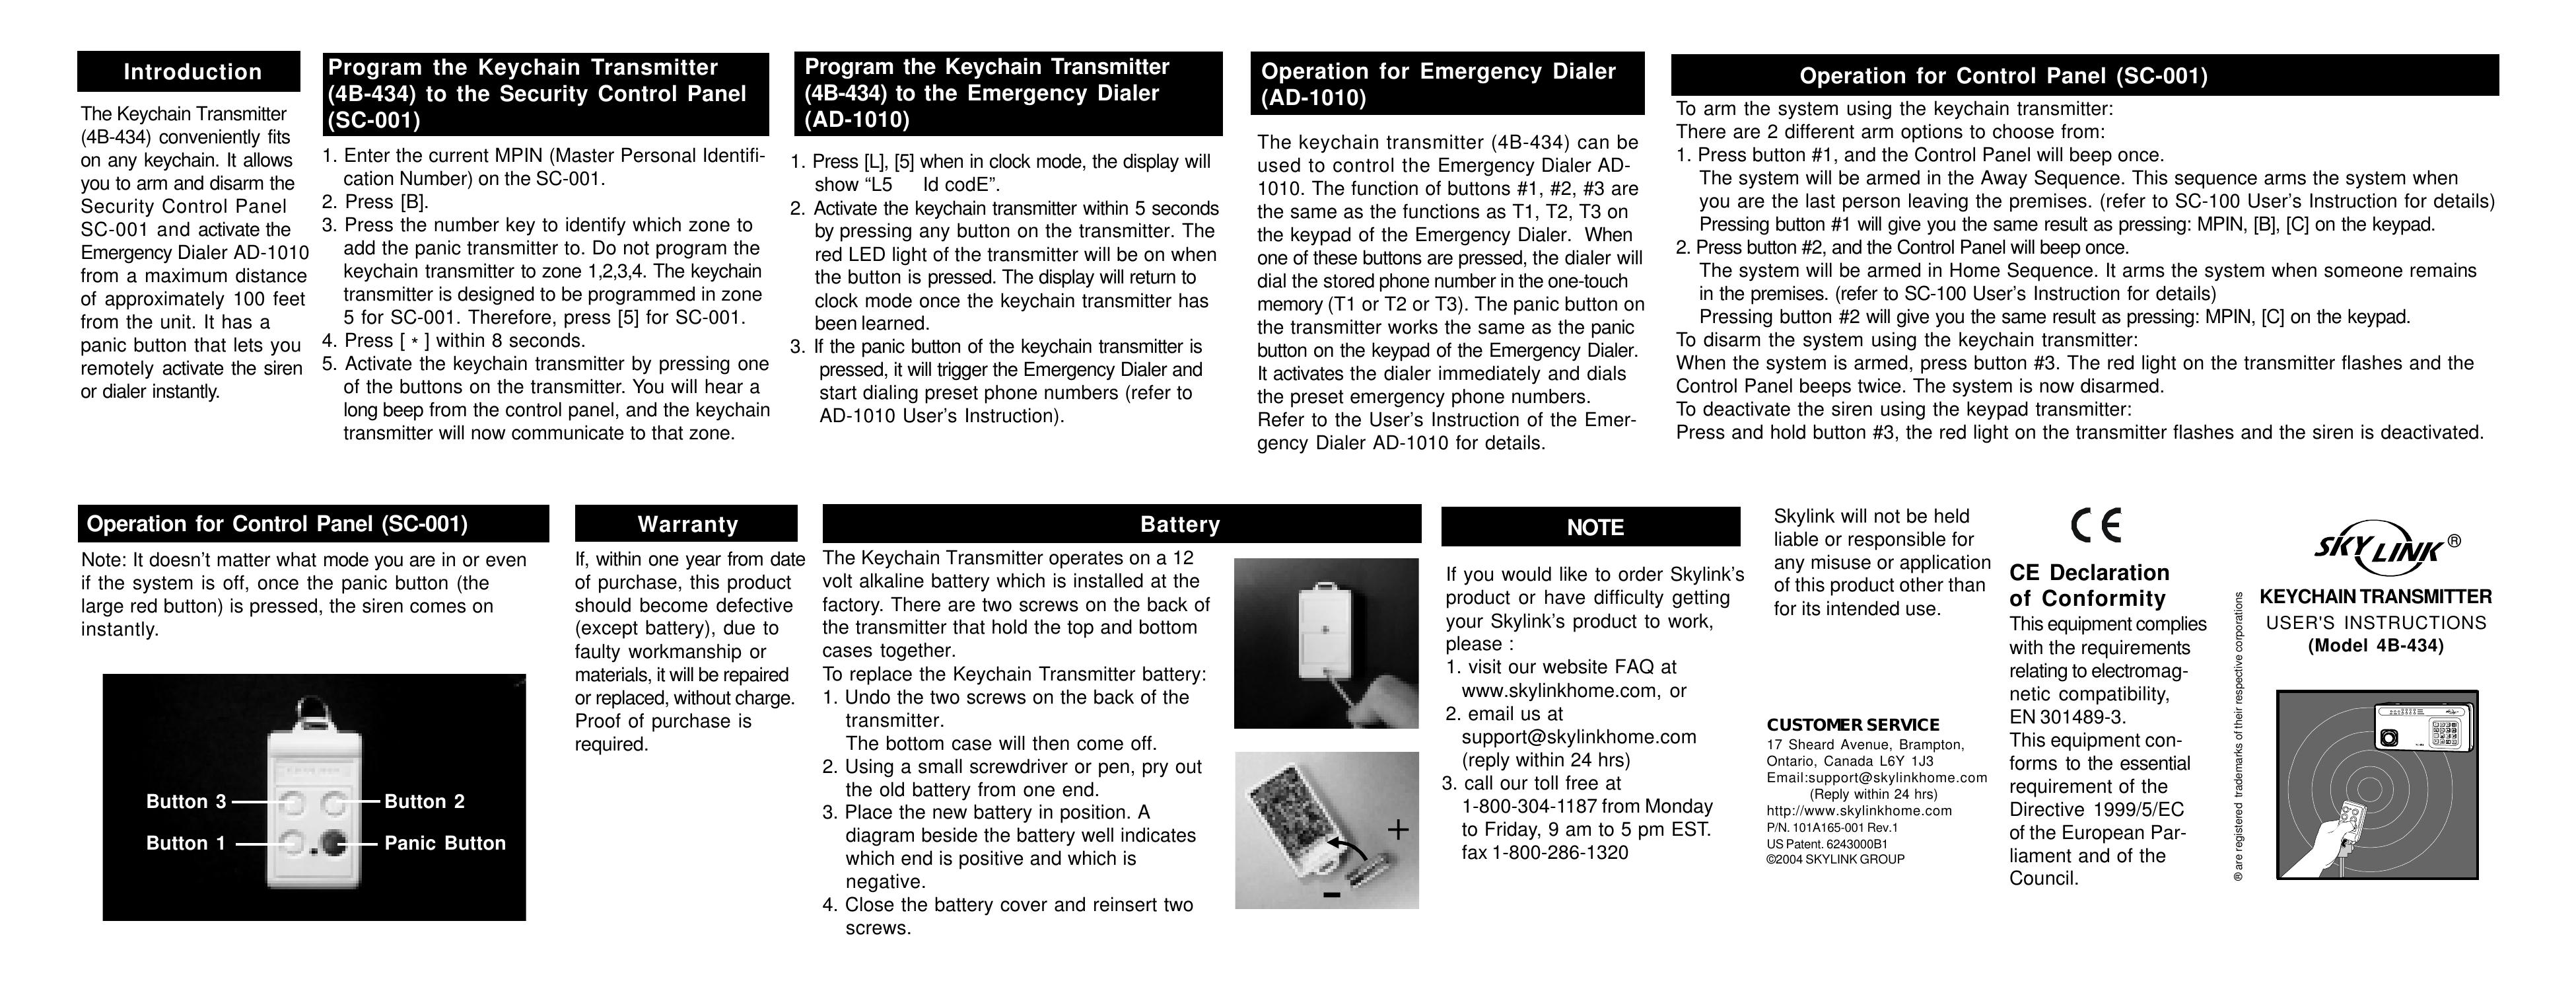 SkyLink AD-1010 Pacemaker User Manual